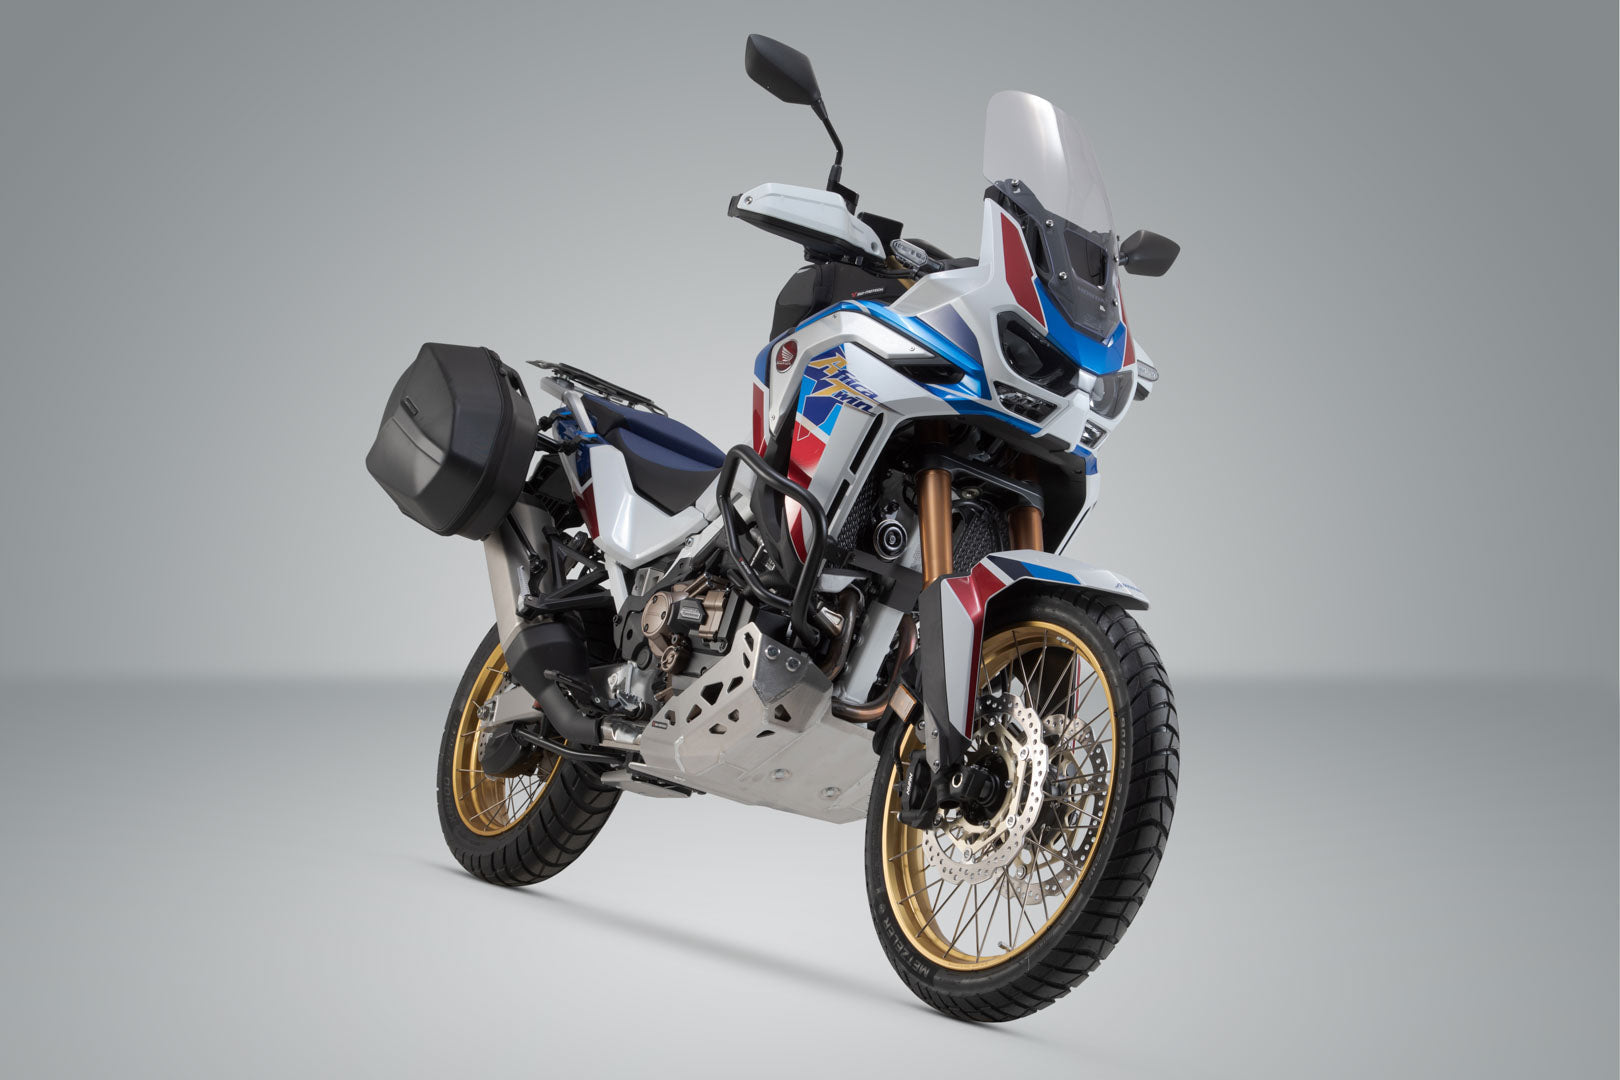 AERO ABS Side Case System 2x25 litre Honda CRF1100L Africa Twin Adv Sp (19-)